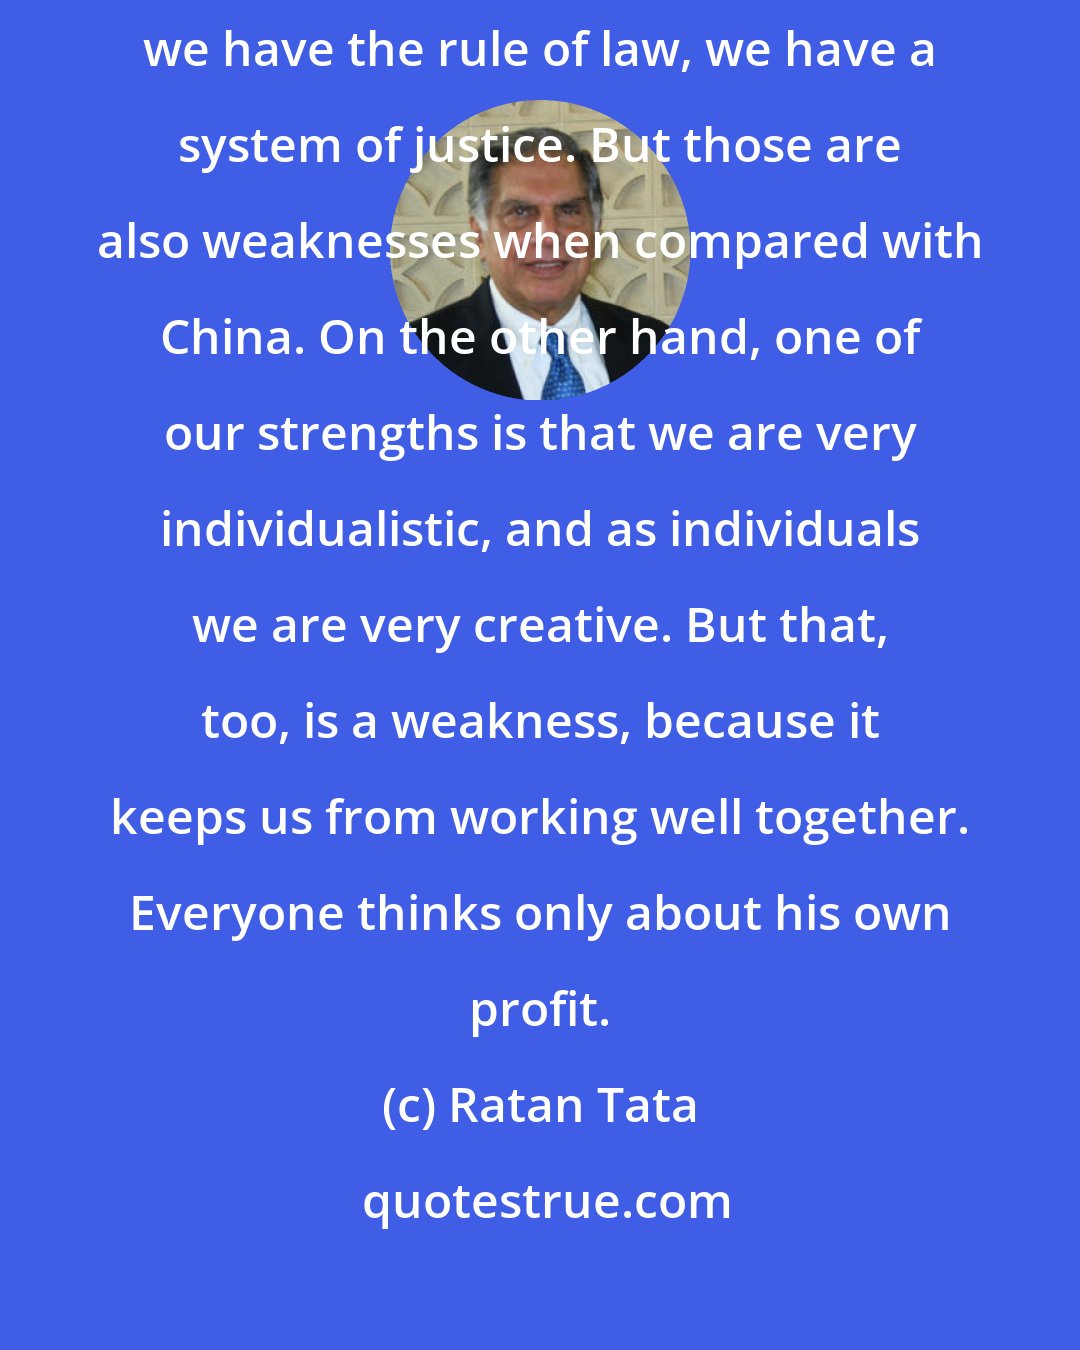 Ratan Tata: We like to say that India has the advantage of being a large market. We have provinces, we have the rule of law, we have a system of justice. But those are also weaknesses when compared with China. On the other hand, one of our strengths is that we are very individualistic, and as individuals we are very creative. But that, too, is a weakness, because it keeps us from working well together. Everyone thinks only about his own profit.